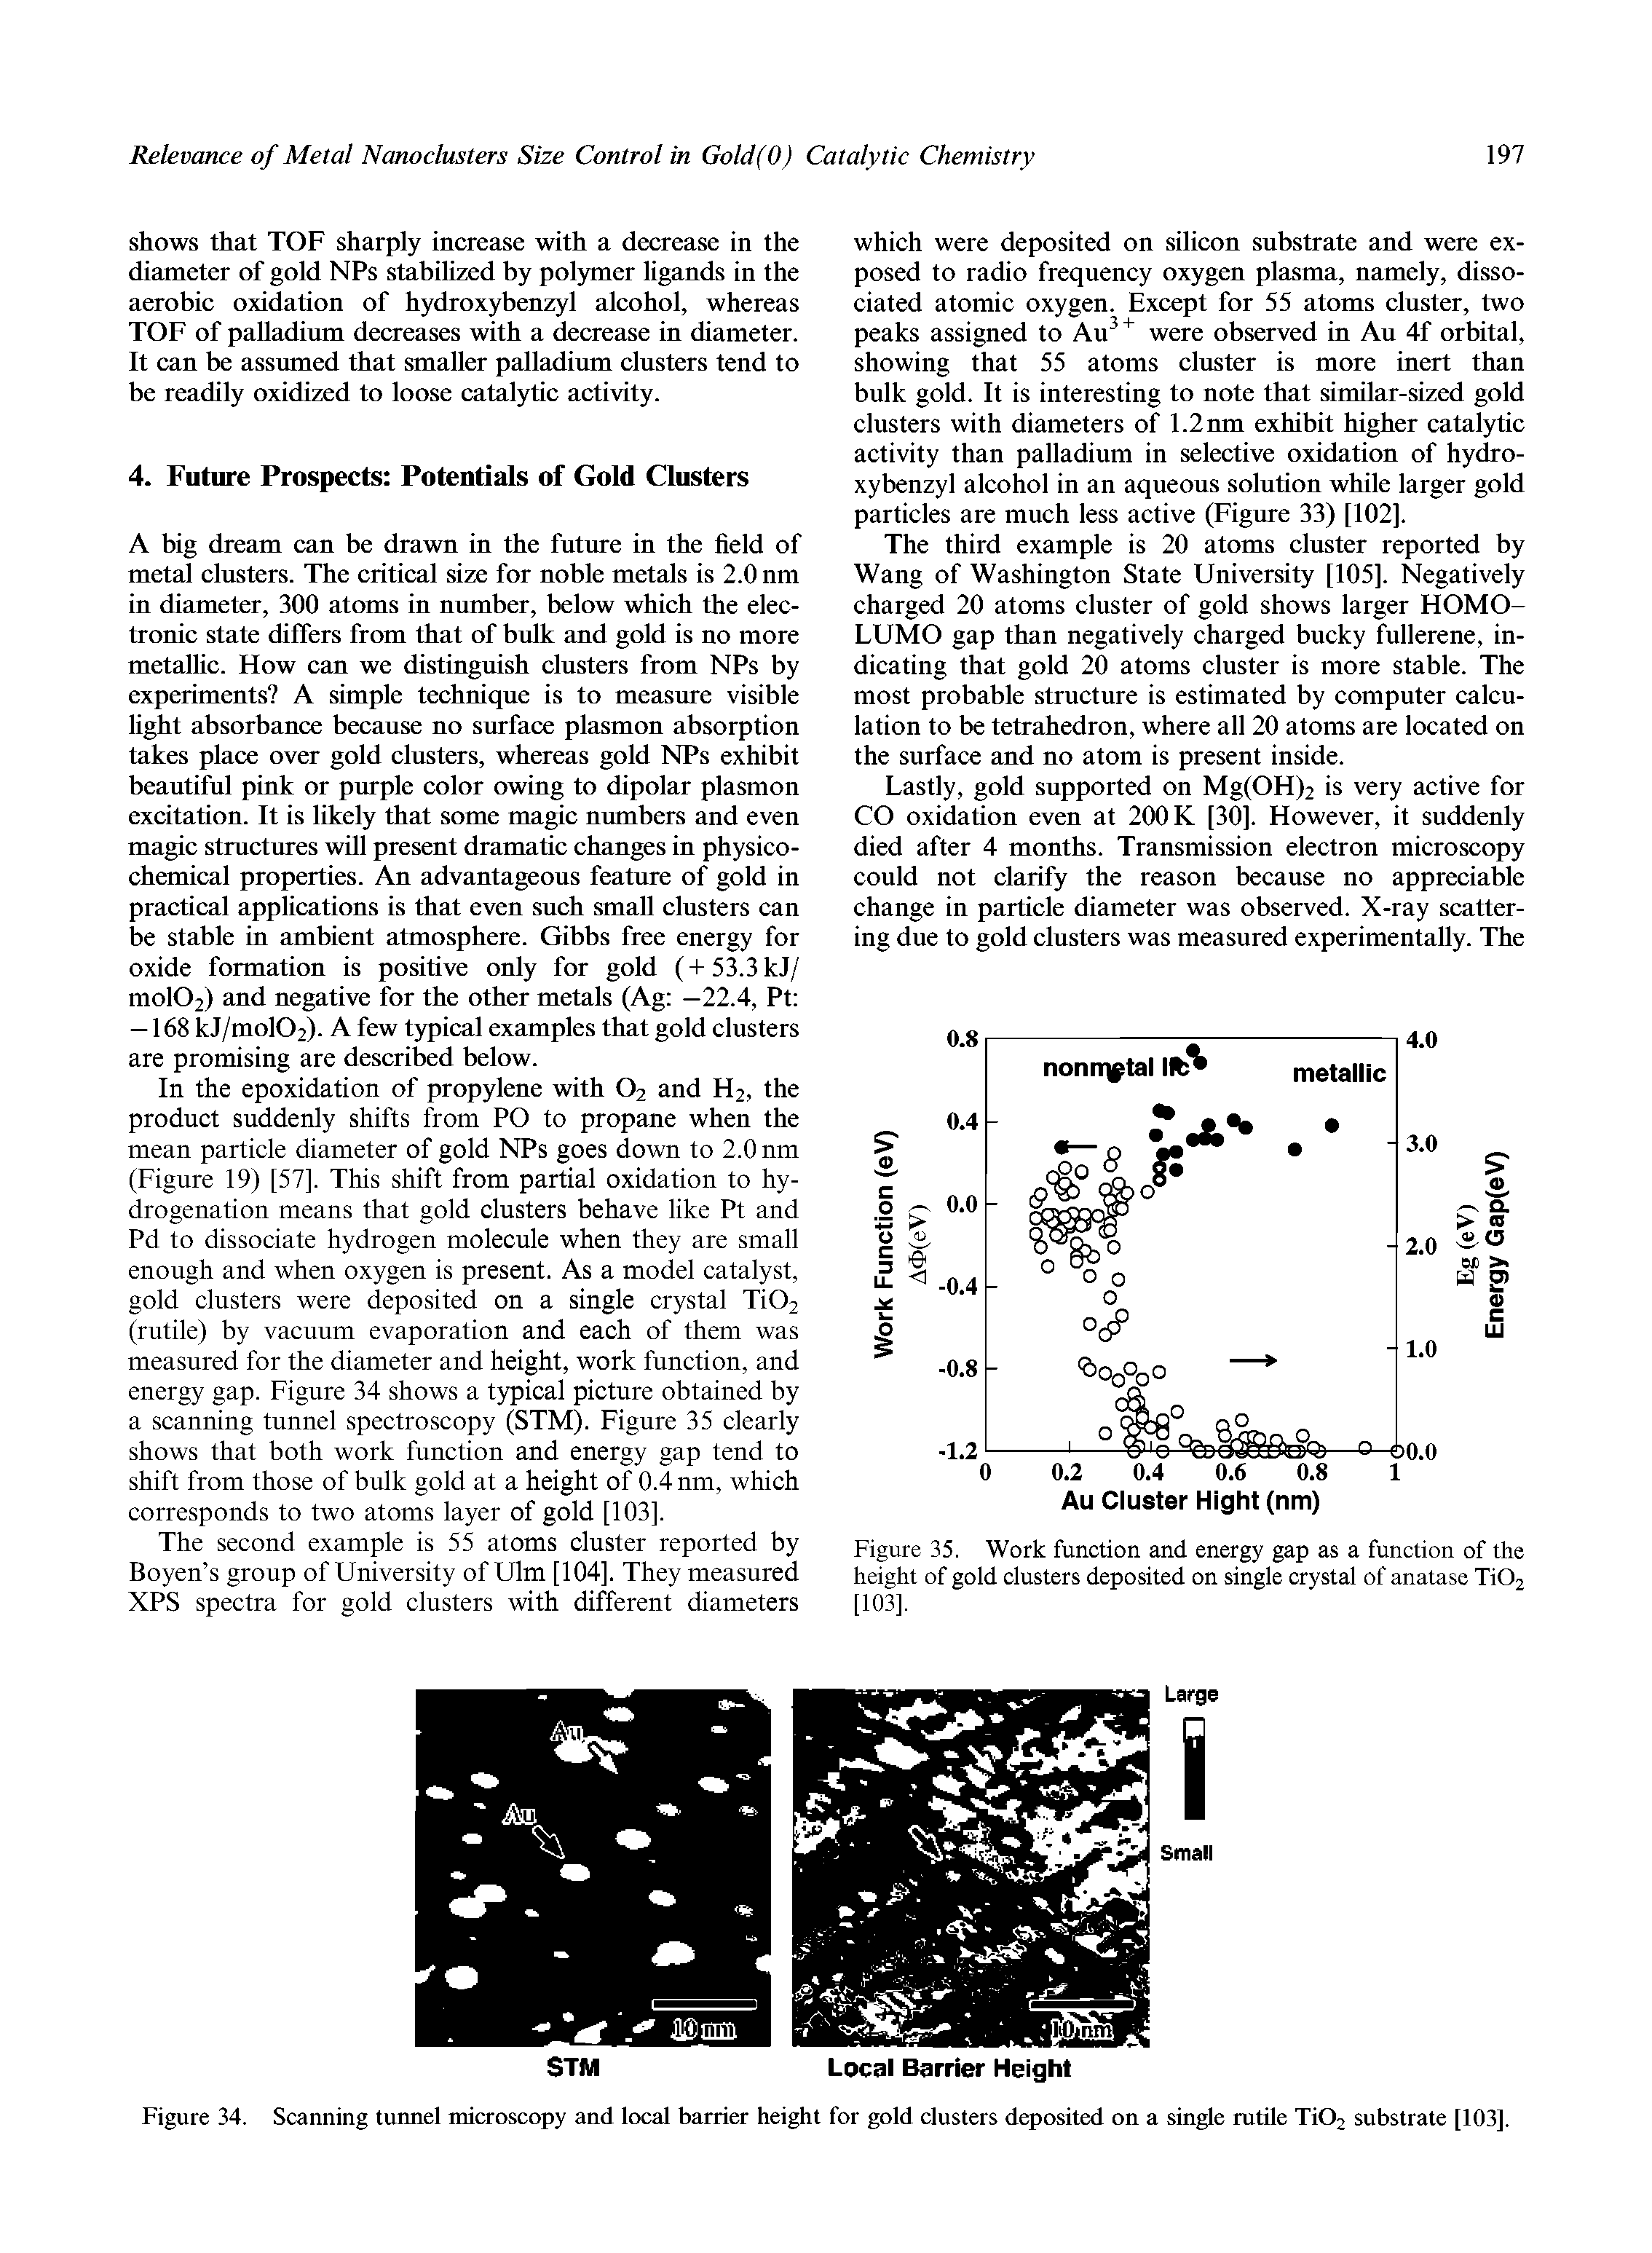 Figure 35. Work function and energy gap as a function of the height of gold clusters deposited on single crystal of anatase Ti02 [103].